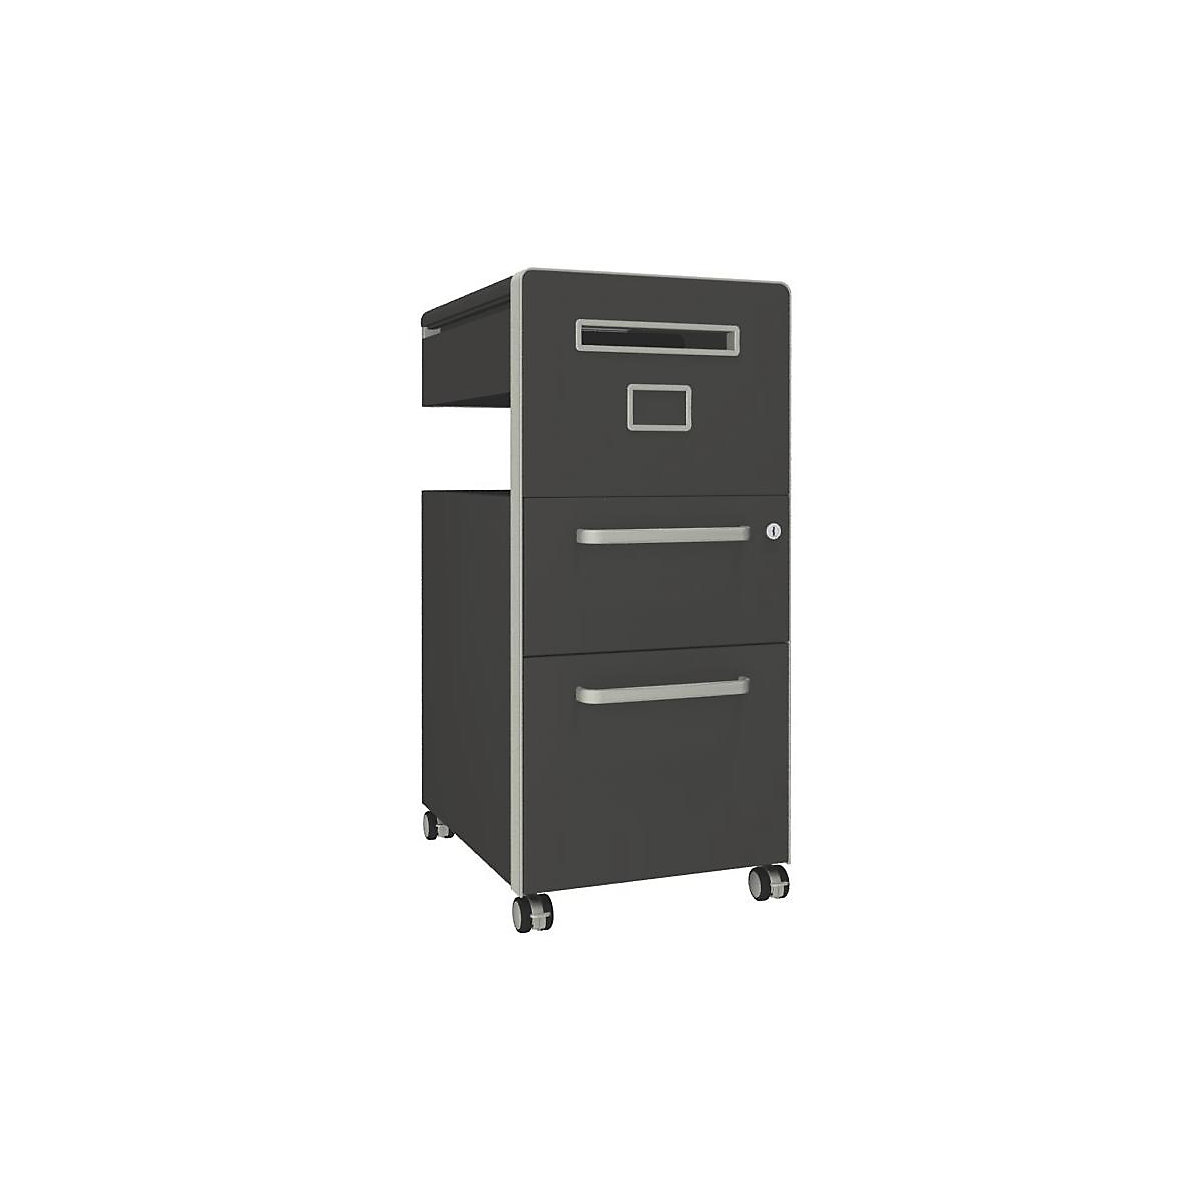 Bite™ pedestal furniture, with 1 whiteboard, opens on the right side – BISLEY, with 1 universal drawer, 1 suspension file drawer, slate-17